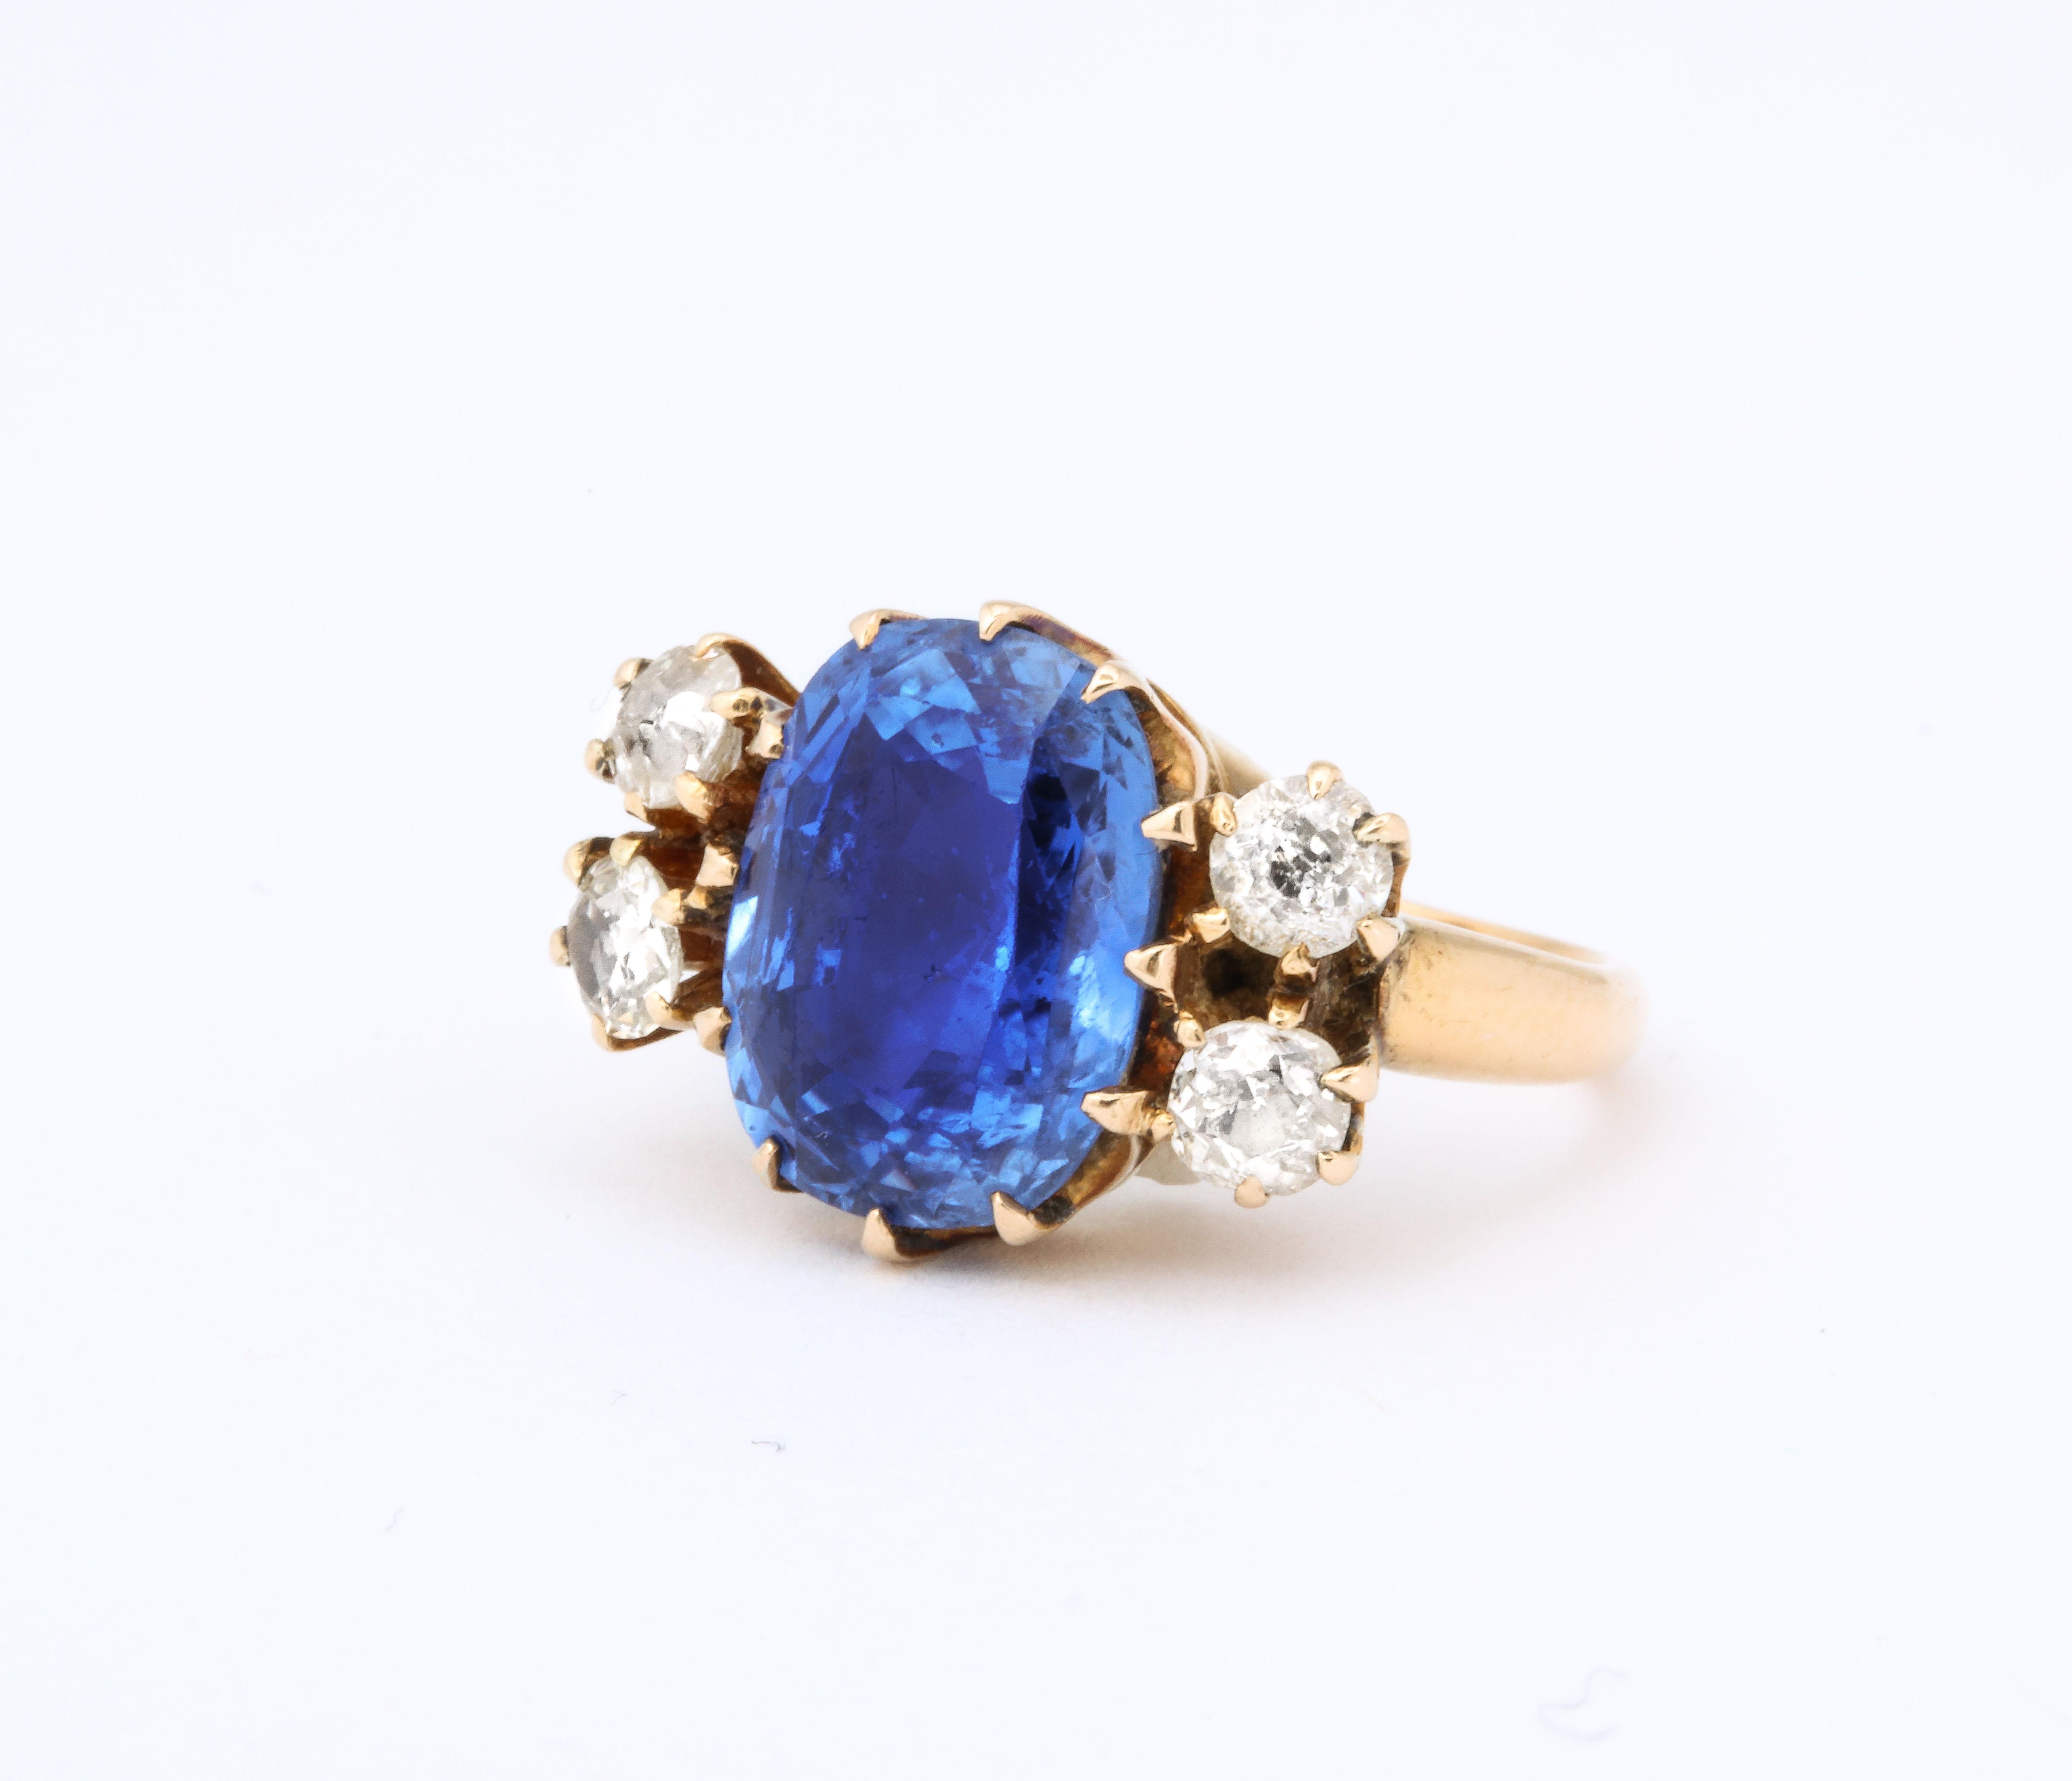 A beautiful Ceylon color Natural Sapphire set between two sets of diamonds . The Sapphire is a 9 carat oval cut.